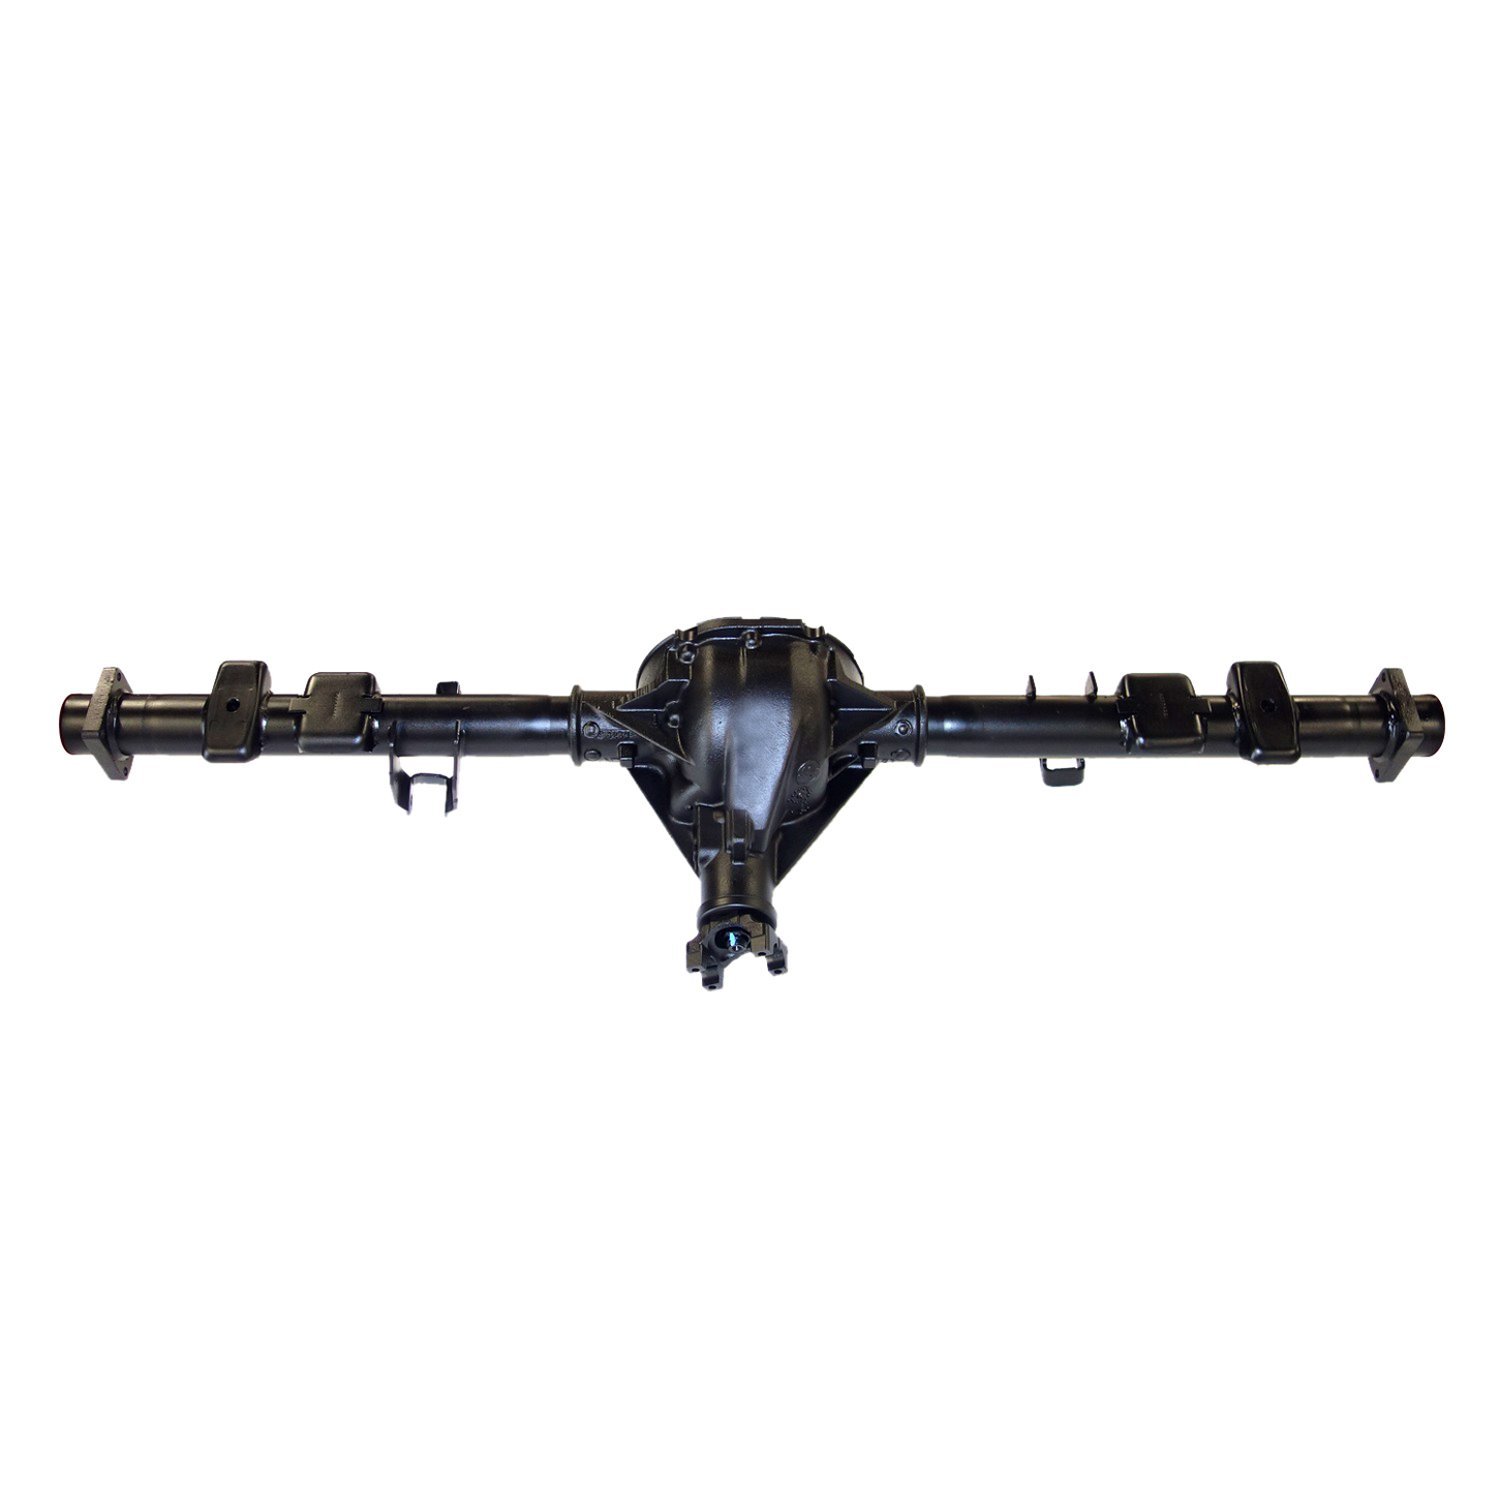 Remanufactured Complete Axle Assy for GM 8.6" 05 &Up Chevy Silverado Drum Brakes 3.42